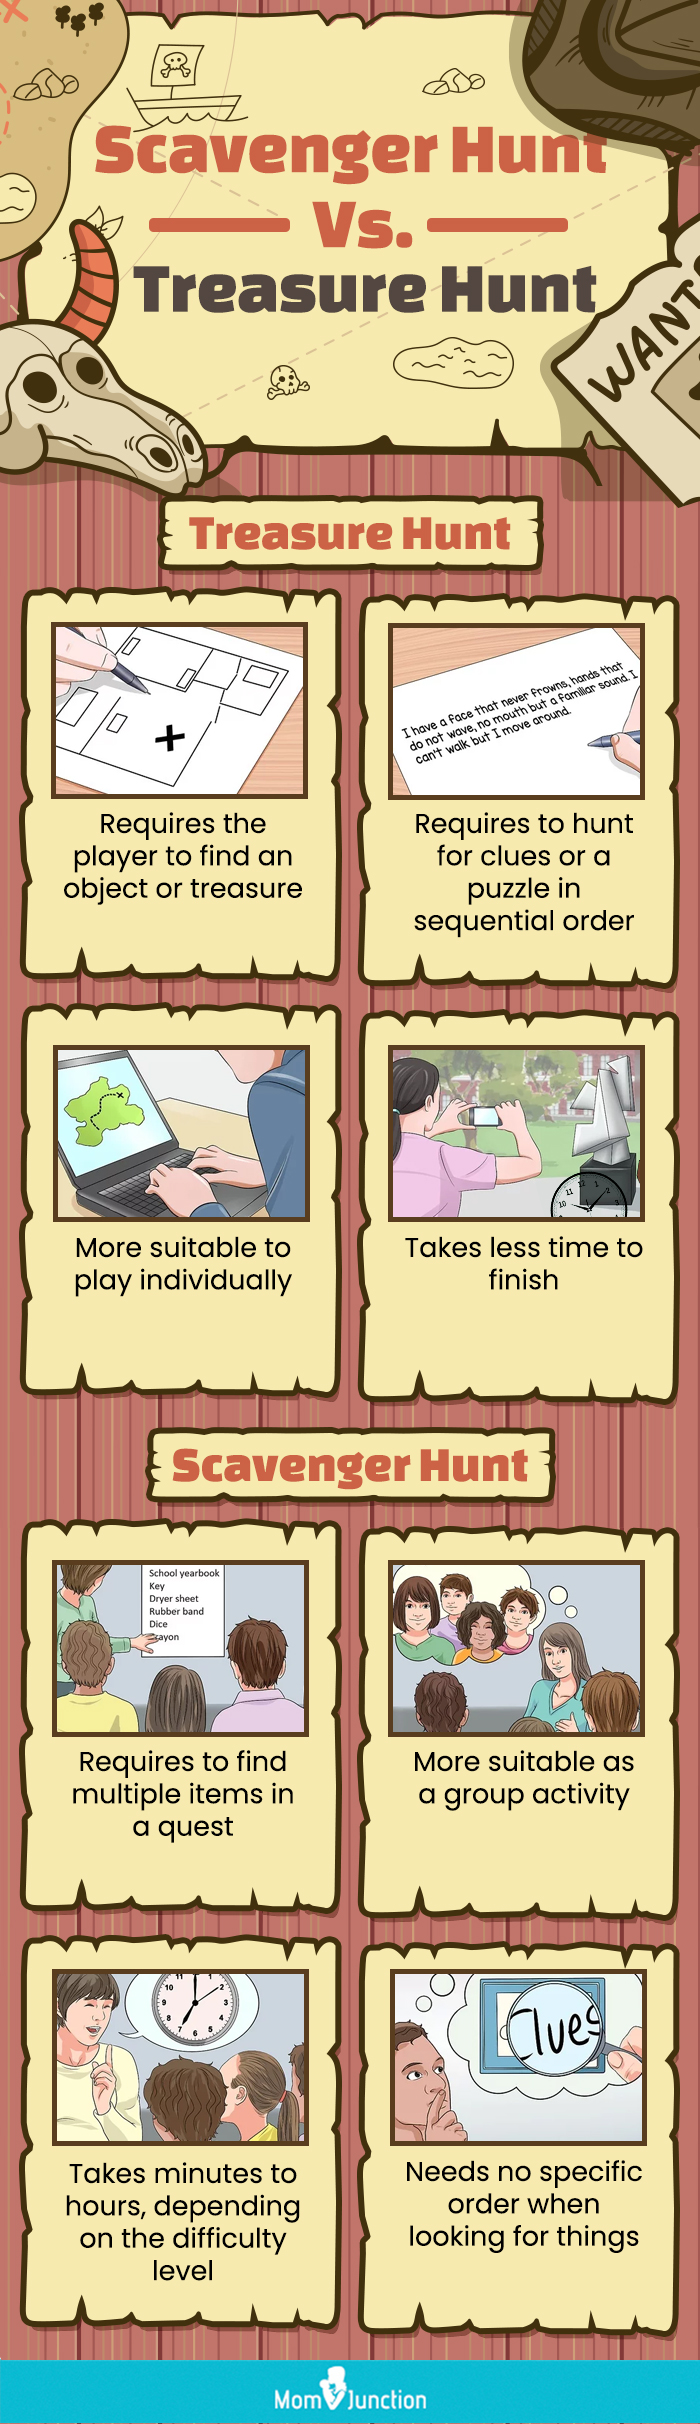 how is scavenger hunt different from treasure hunt (infographic)